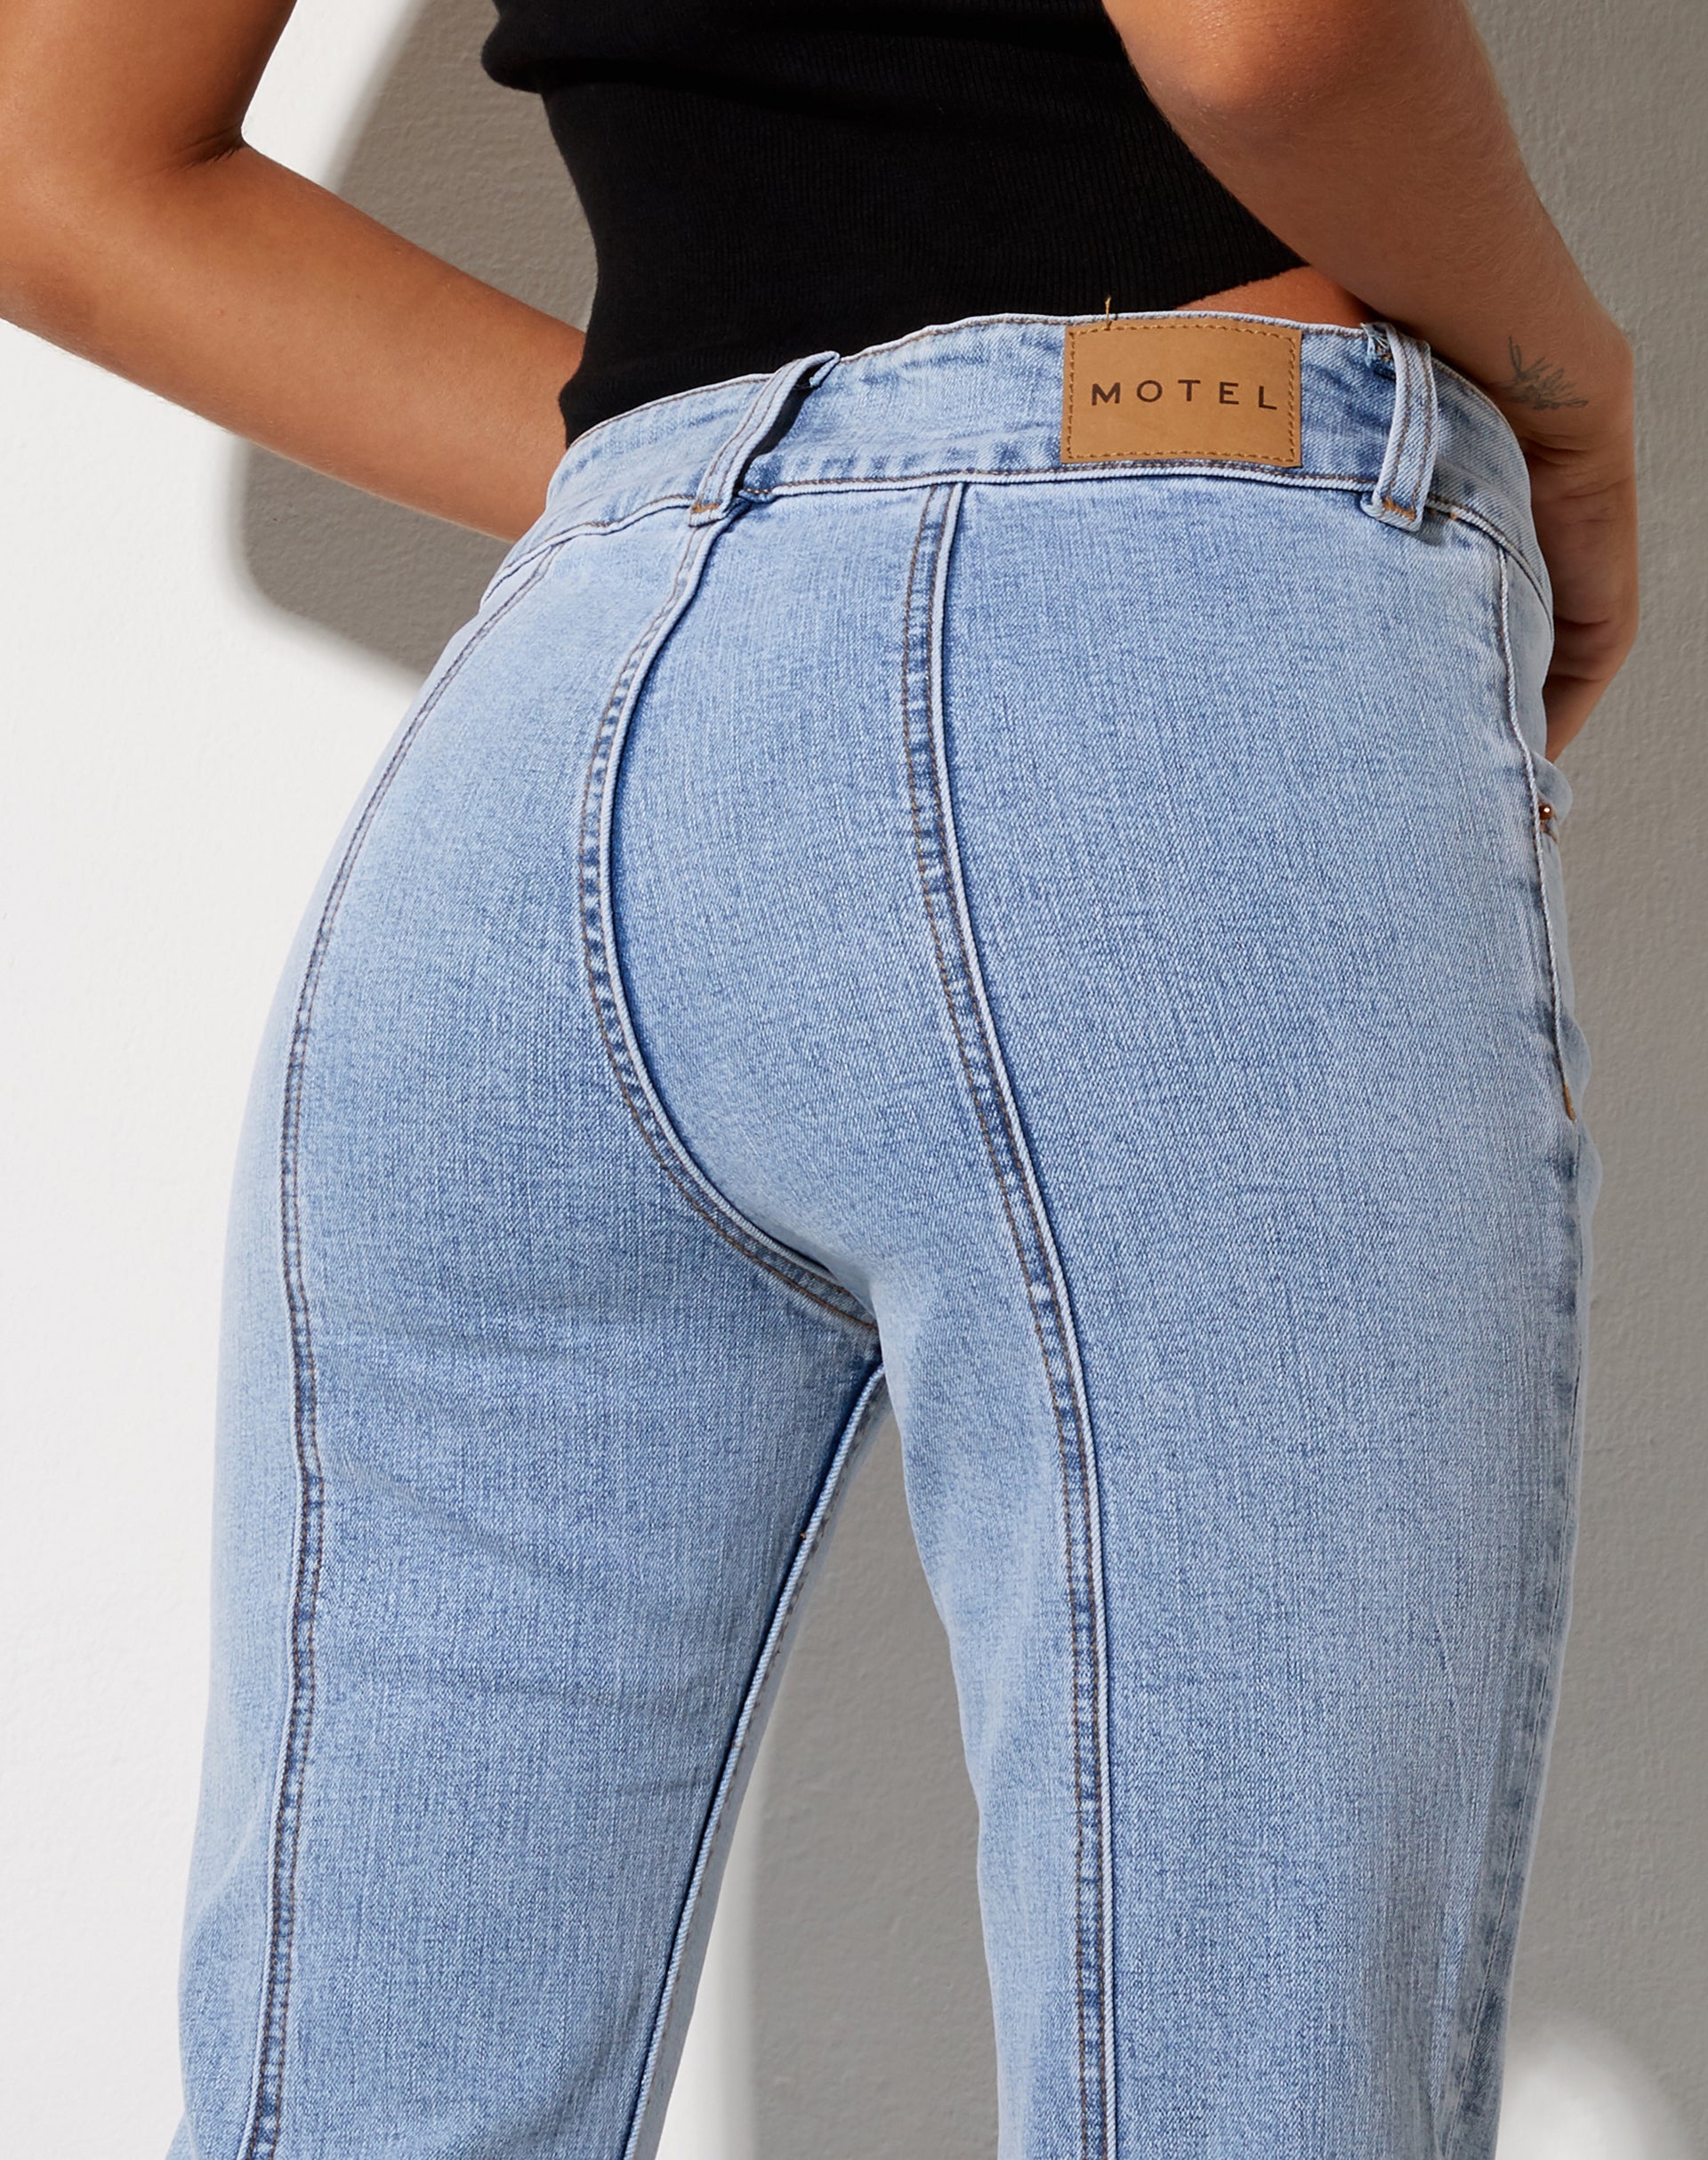 Image of Low Rise Seam Jeans in Super Light Wash Blue